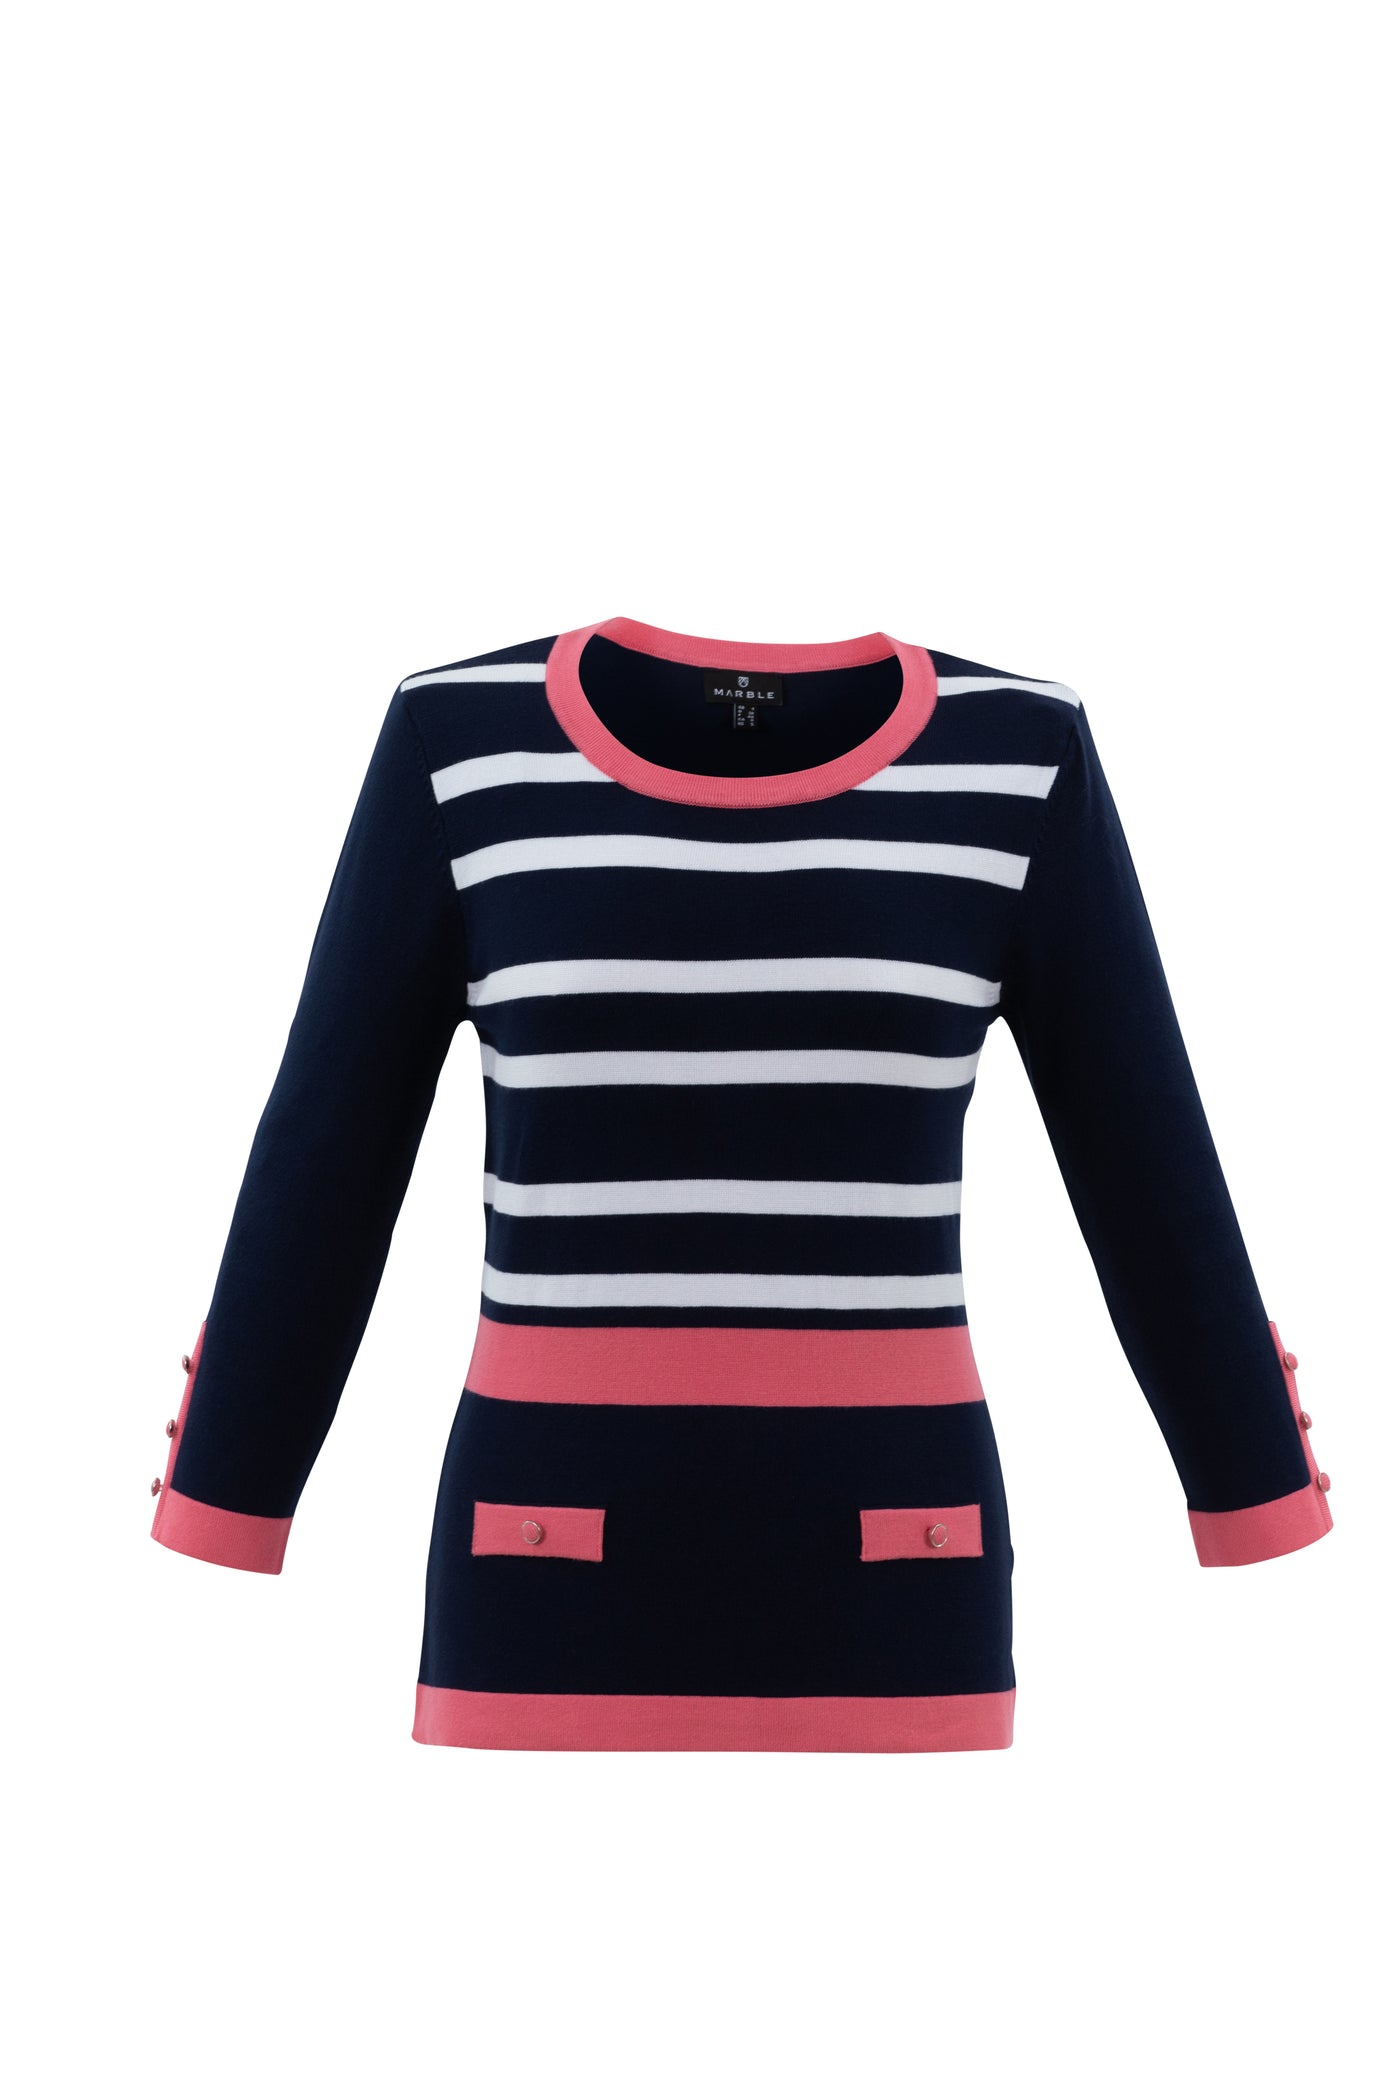 Coral/Navy/White Stripe Jumper With Buttons